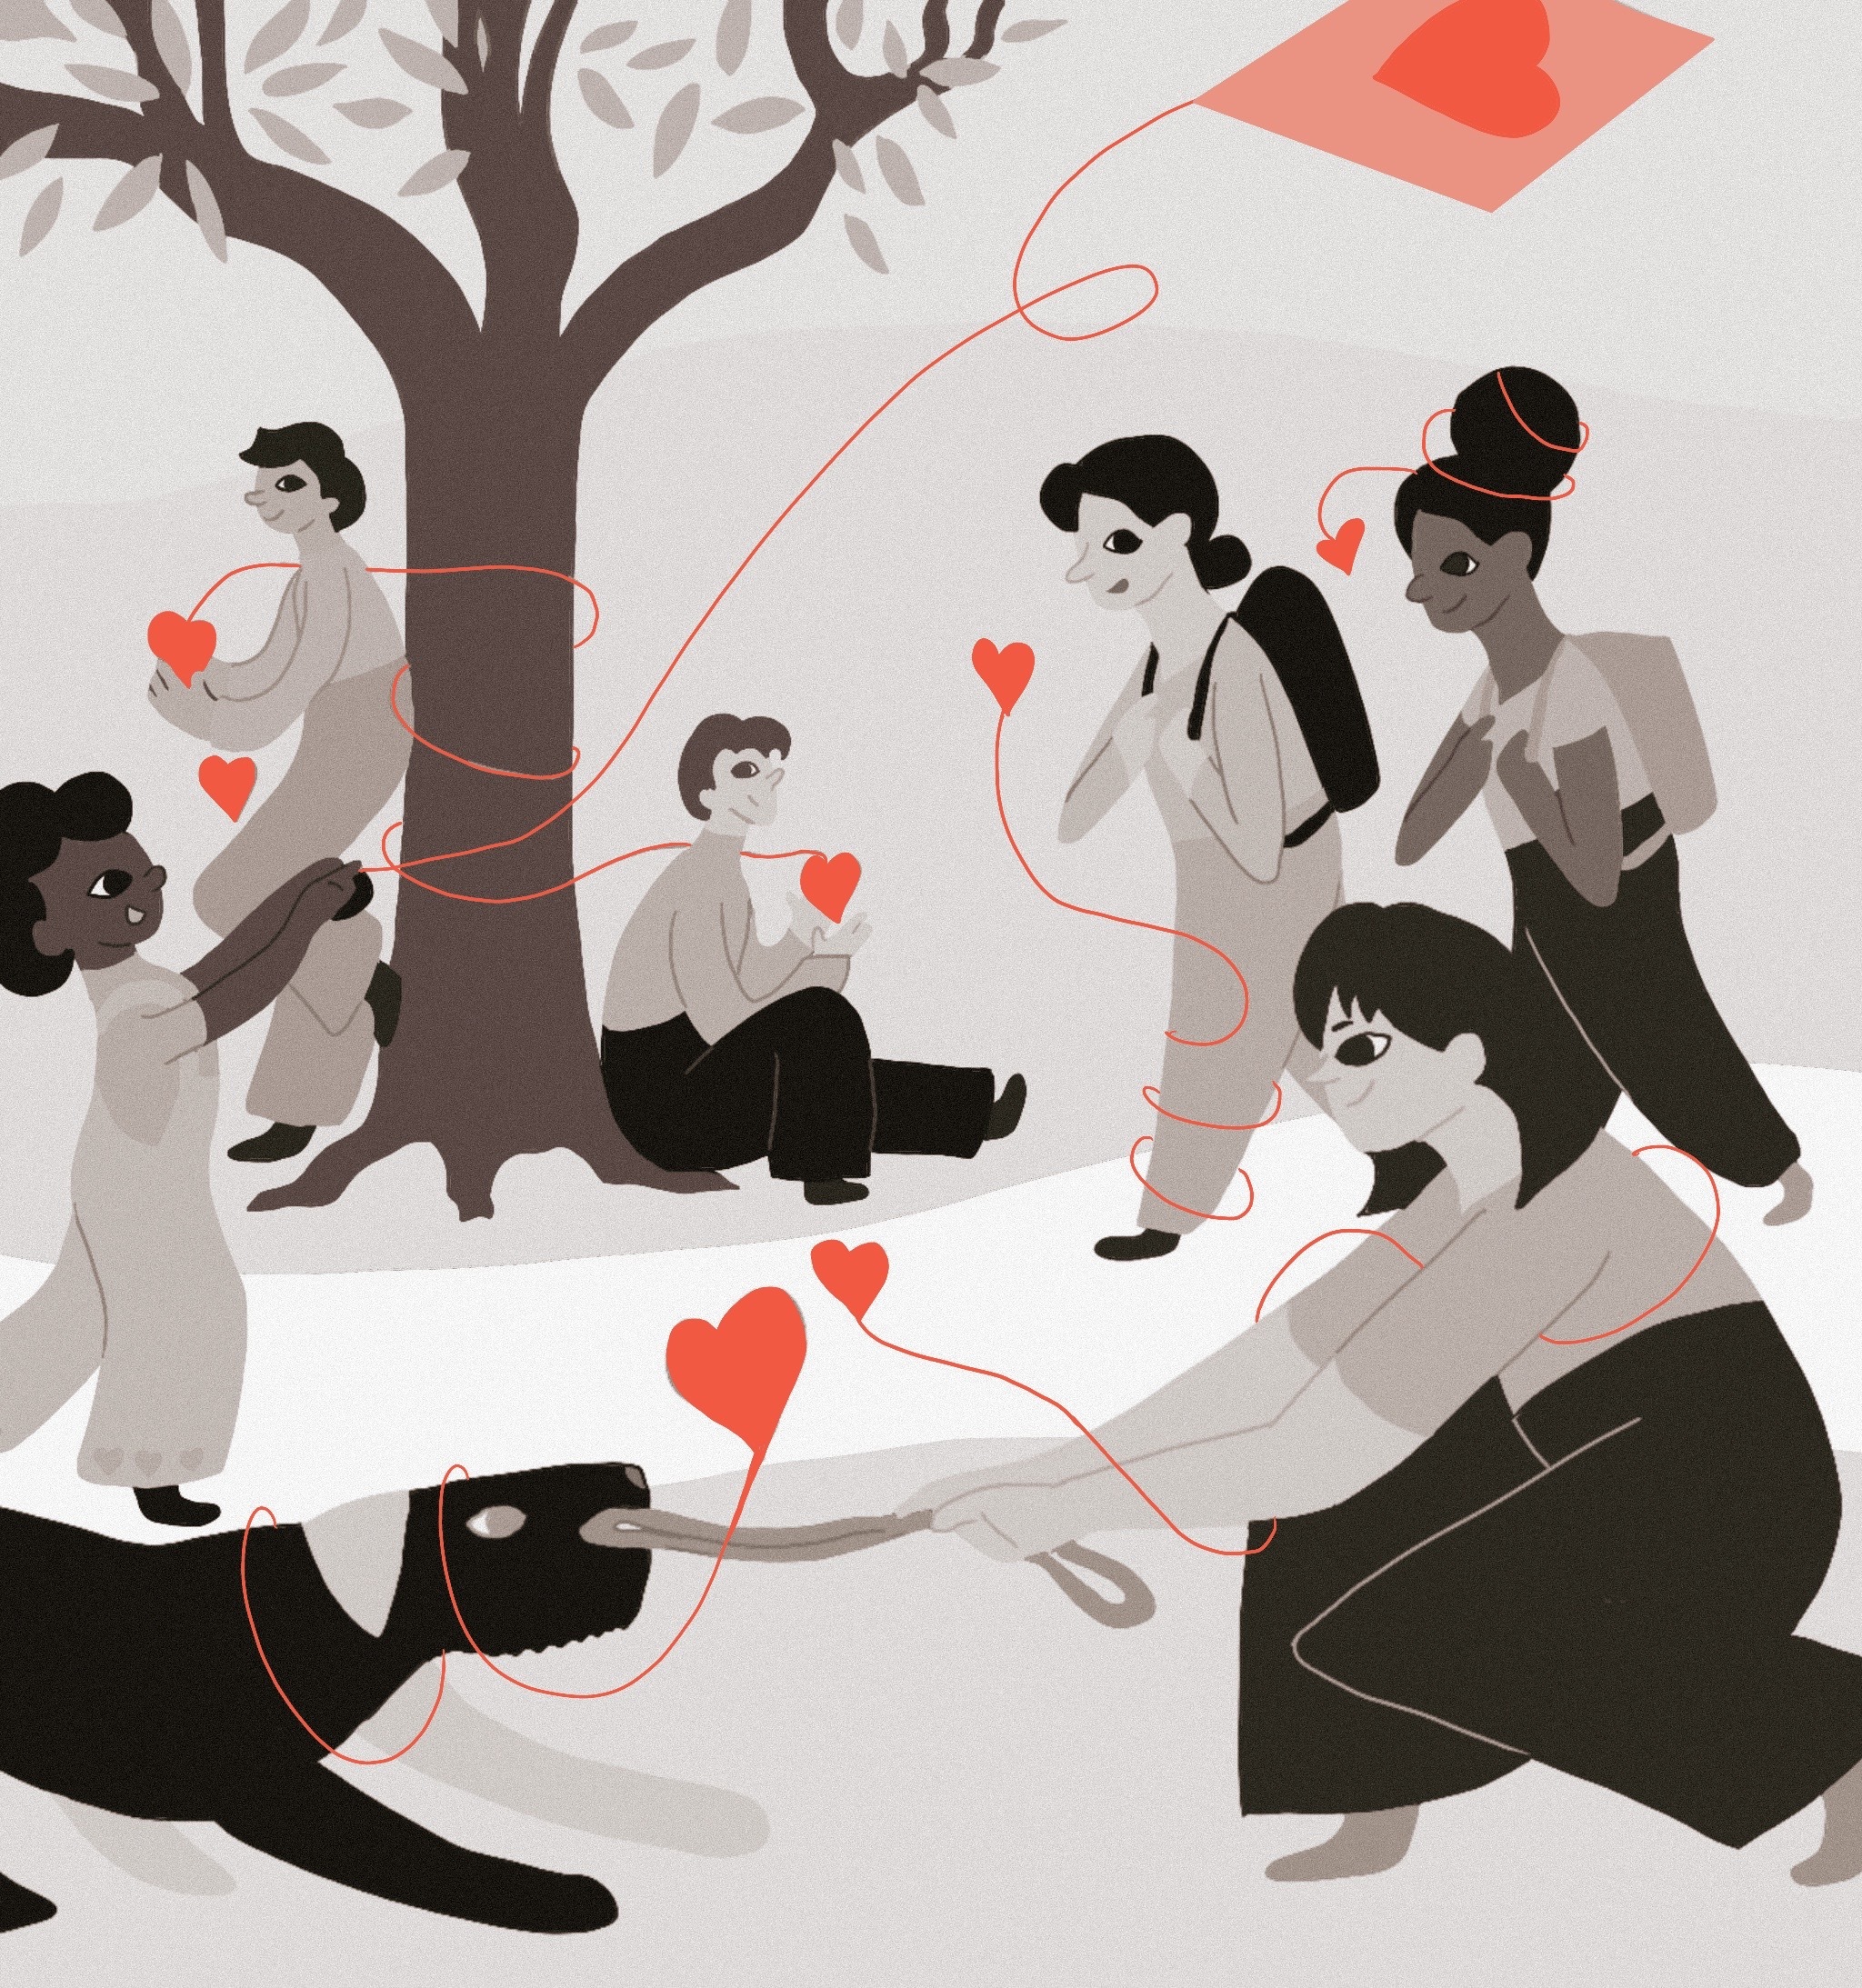 This image contains different people experiencing different forms of love. Hearts with strings wrap around people and the love they are experiencing. There is a child flying a kite, a woman playing fetch with her dog, two girl friends walking together, and two men back to back on a tree.